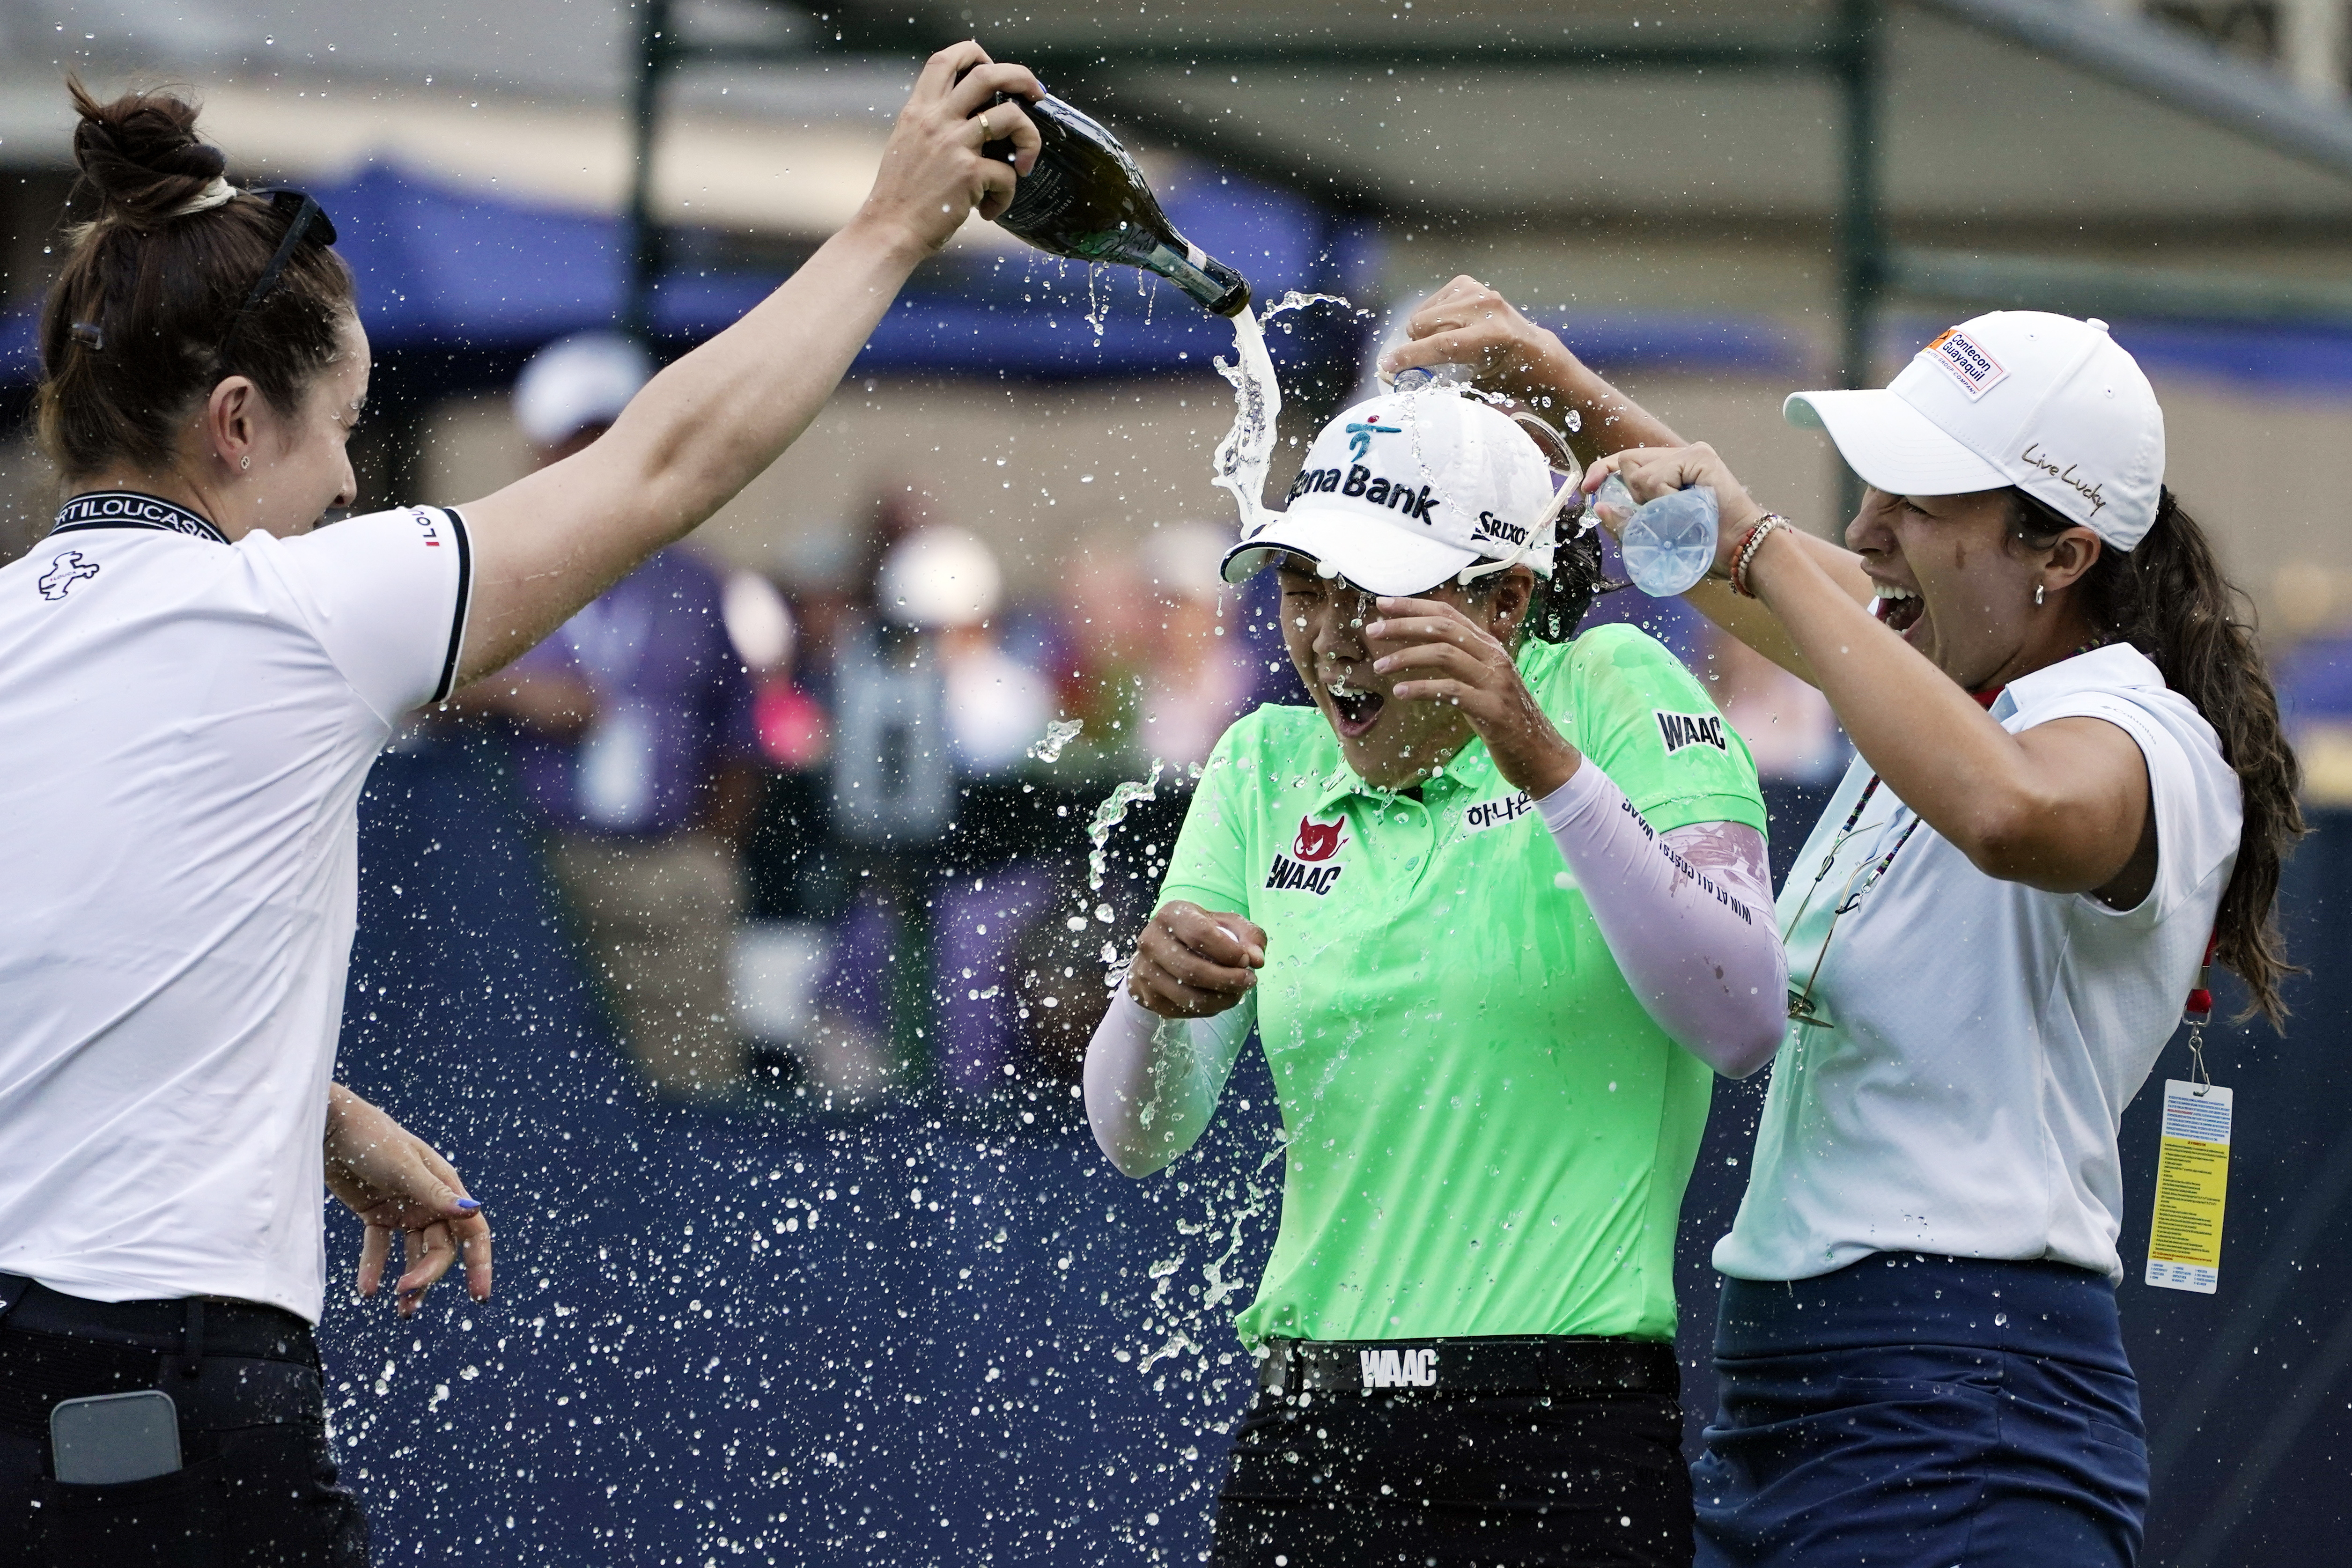 Awesome Aussie: Lee wins . Women's Open, record $